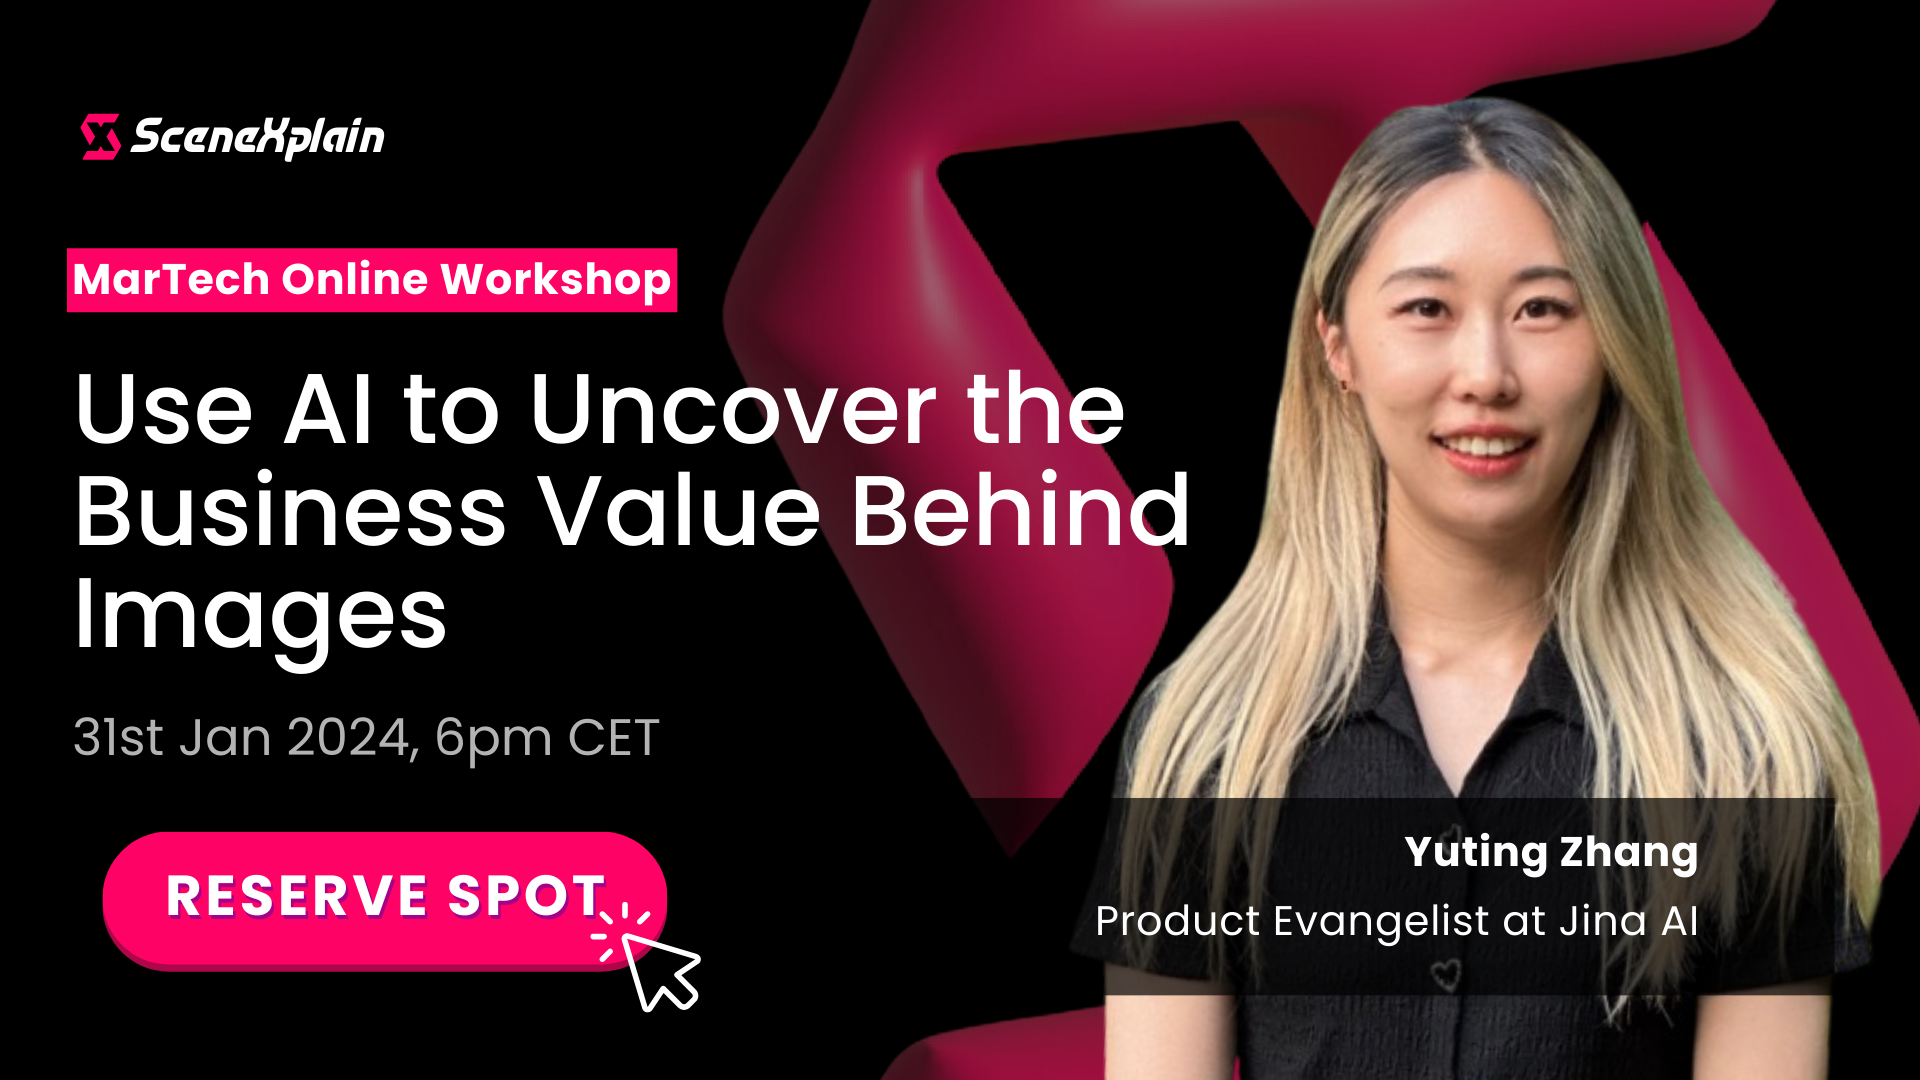 An advertisement for a MarTech Online Workshop titled "Use AI to Uncover the Business Value Behind Images," featuring a promi